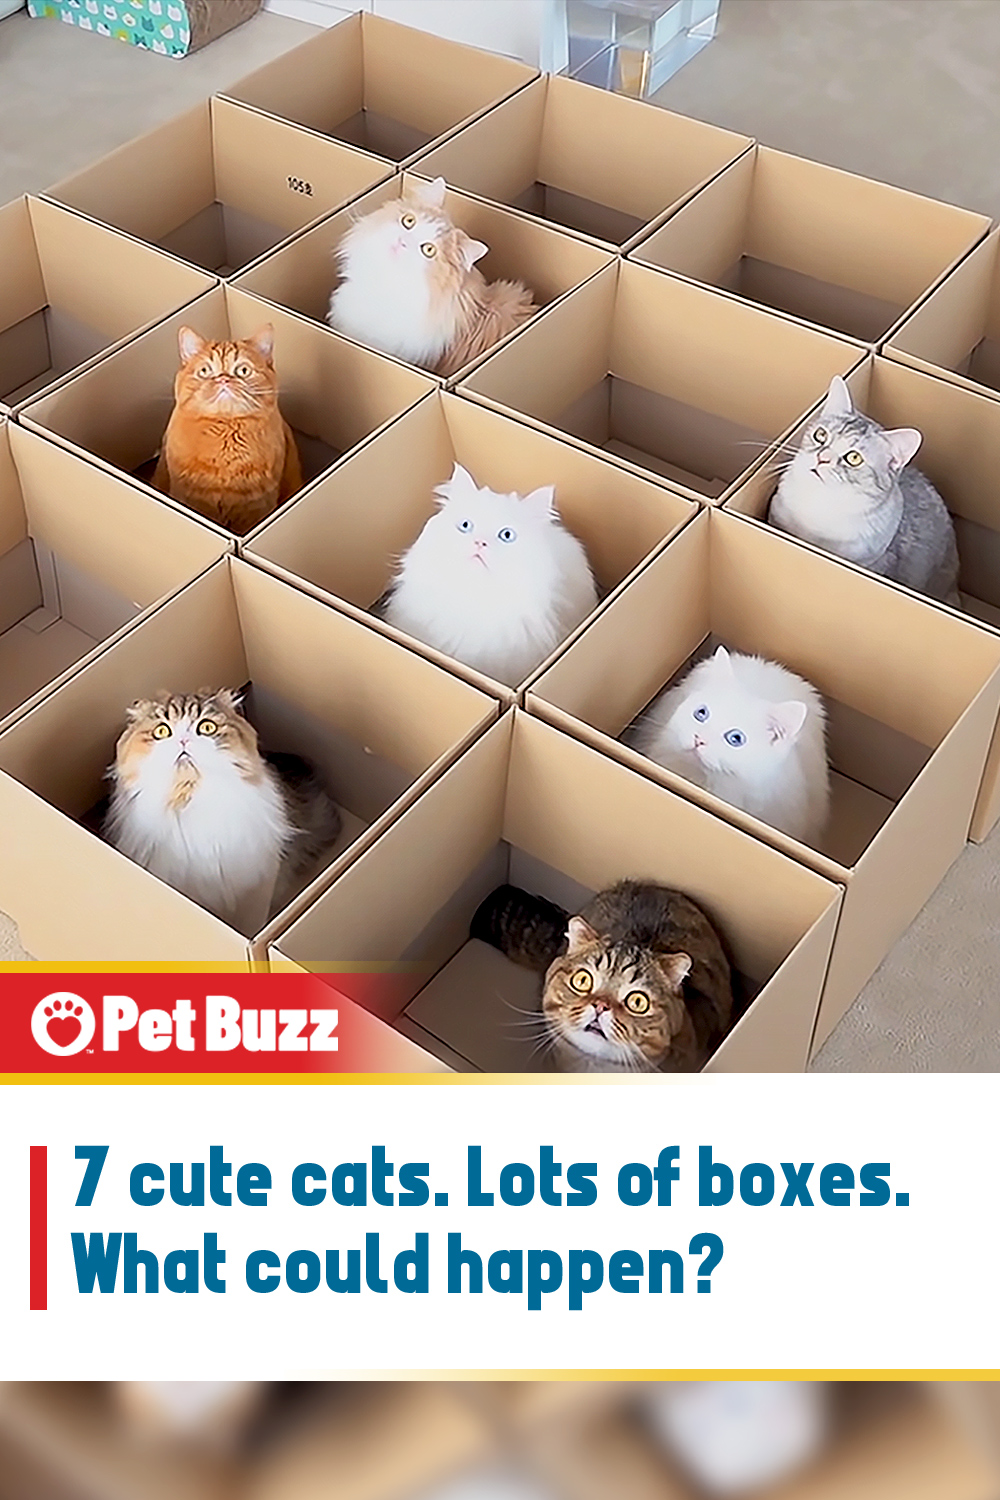 7 cute cats. Lots of boxes. What could happen?